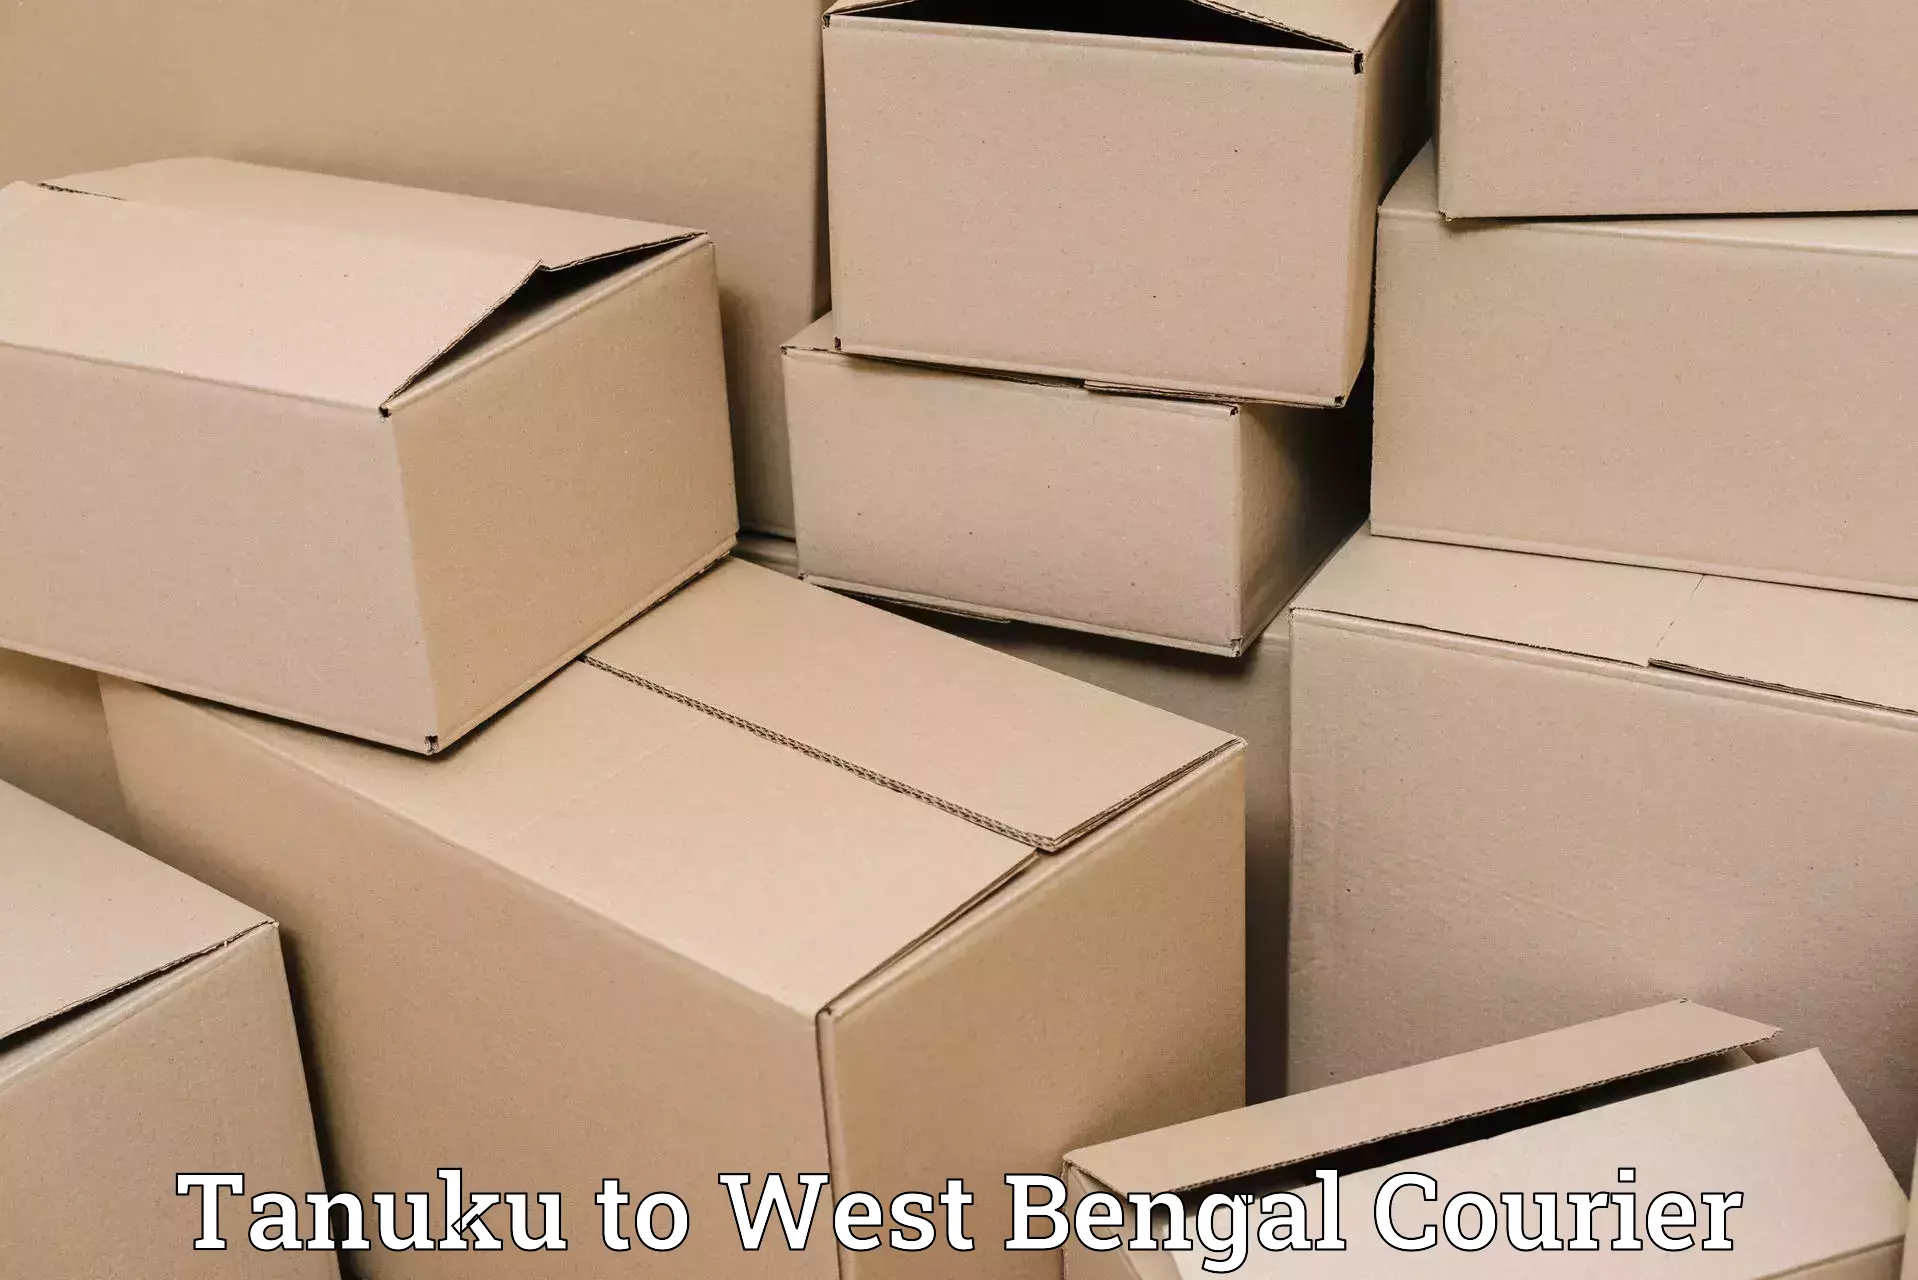 Luggage shipment specialists Tanuku to West Bengal